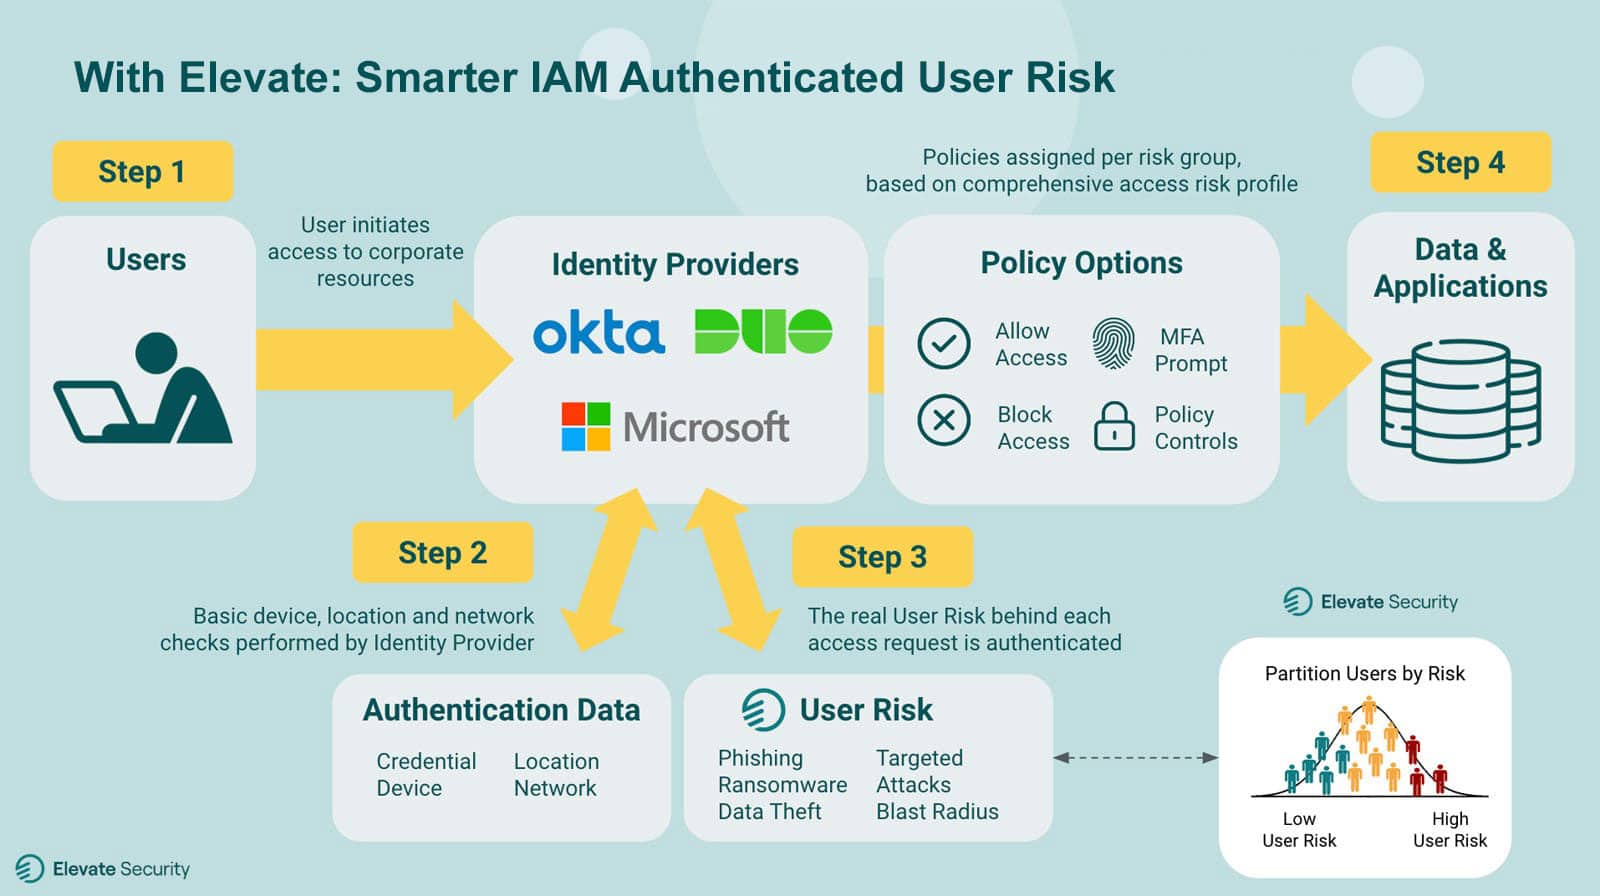 Infographic with info about Elevate Security's Smarter ITAM Authenticated User Risk solution